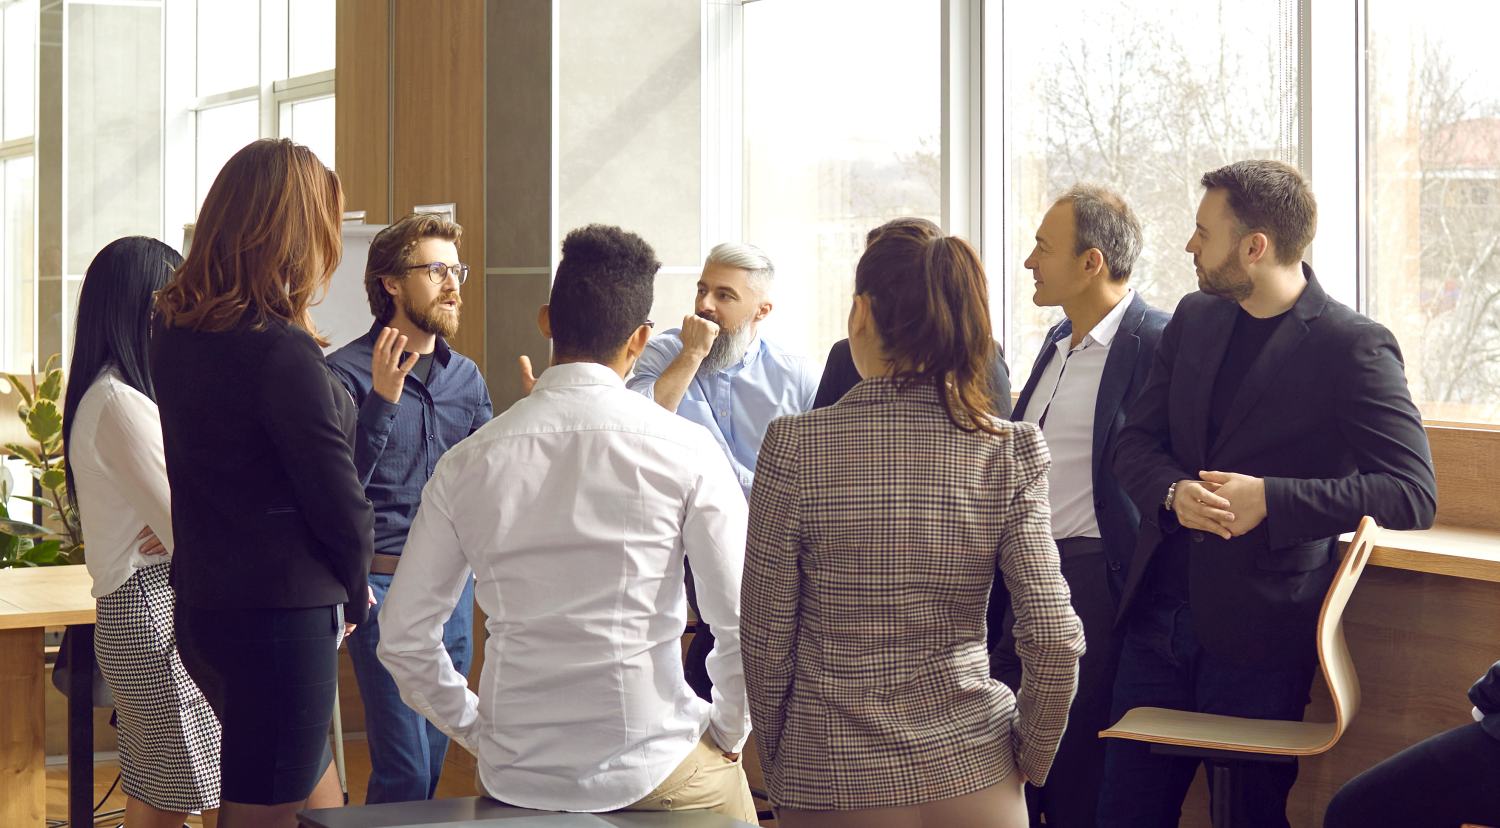 Business coach meeting with group of people in modern office interior. Team of workers listening to teacher's inspirational speech during creative business training class. Banner, header background